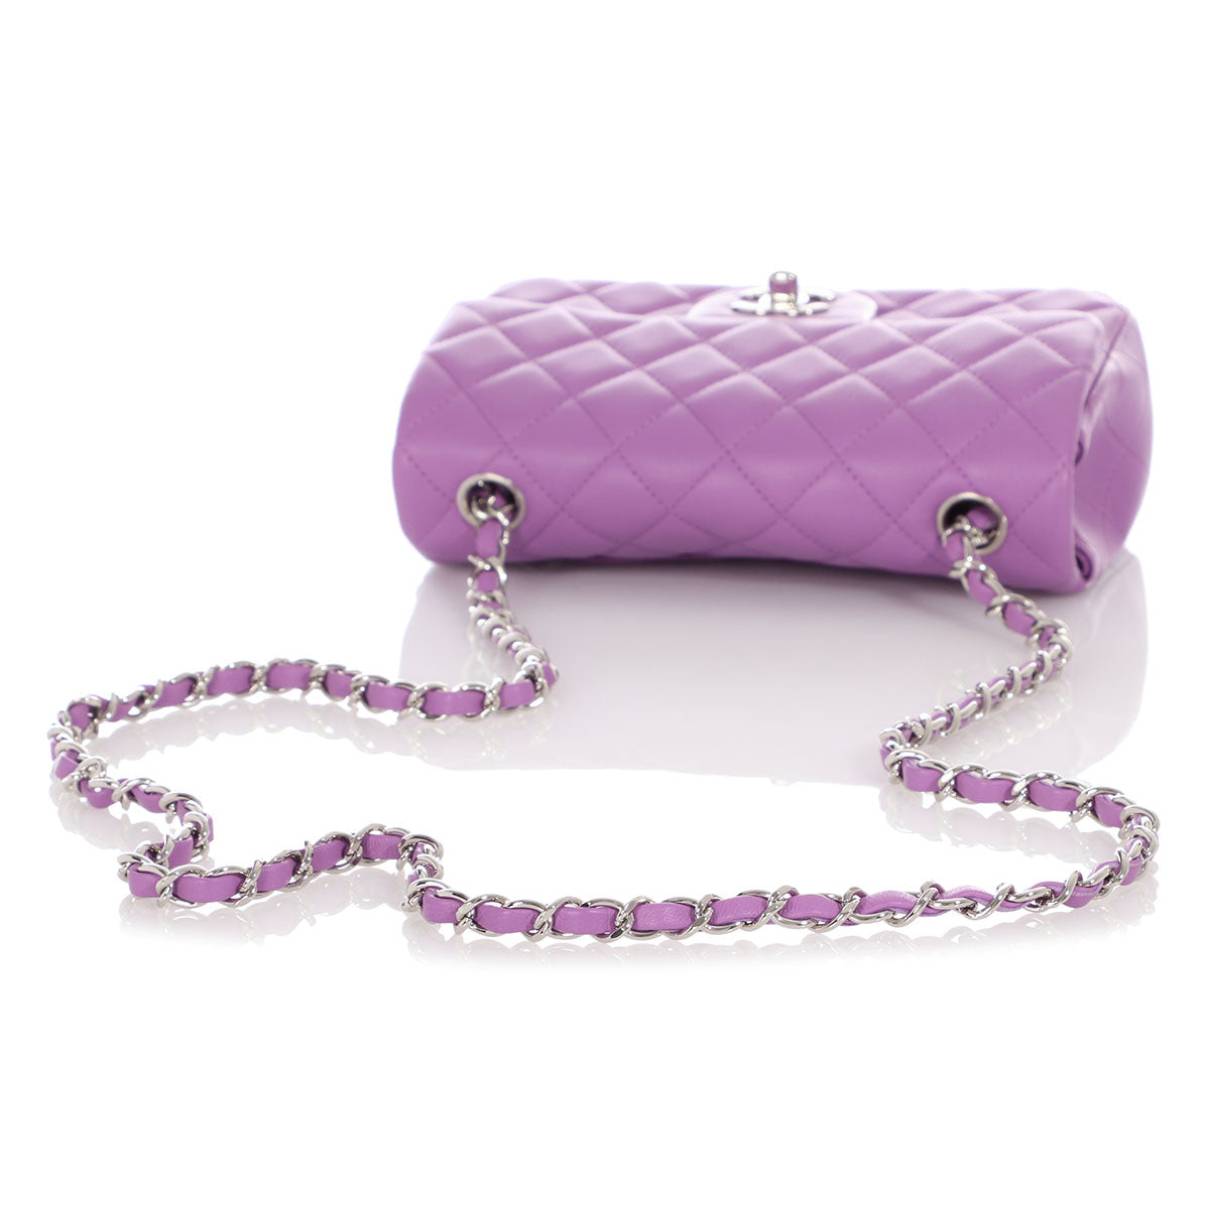 CHANEL Small Boy Bag Light Purple Quilted Patent Leather With Gold Hardware  -NEW